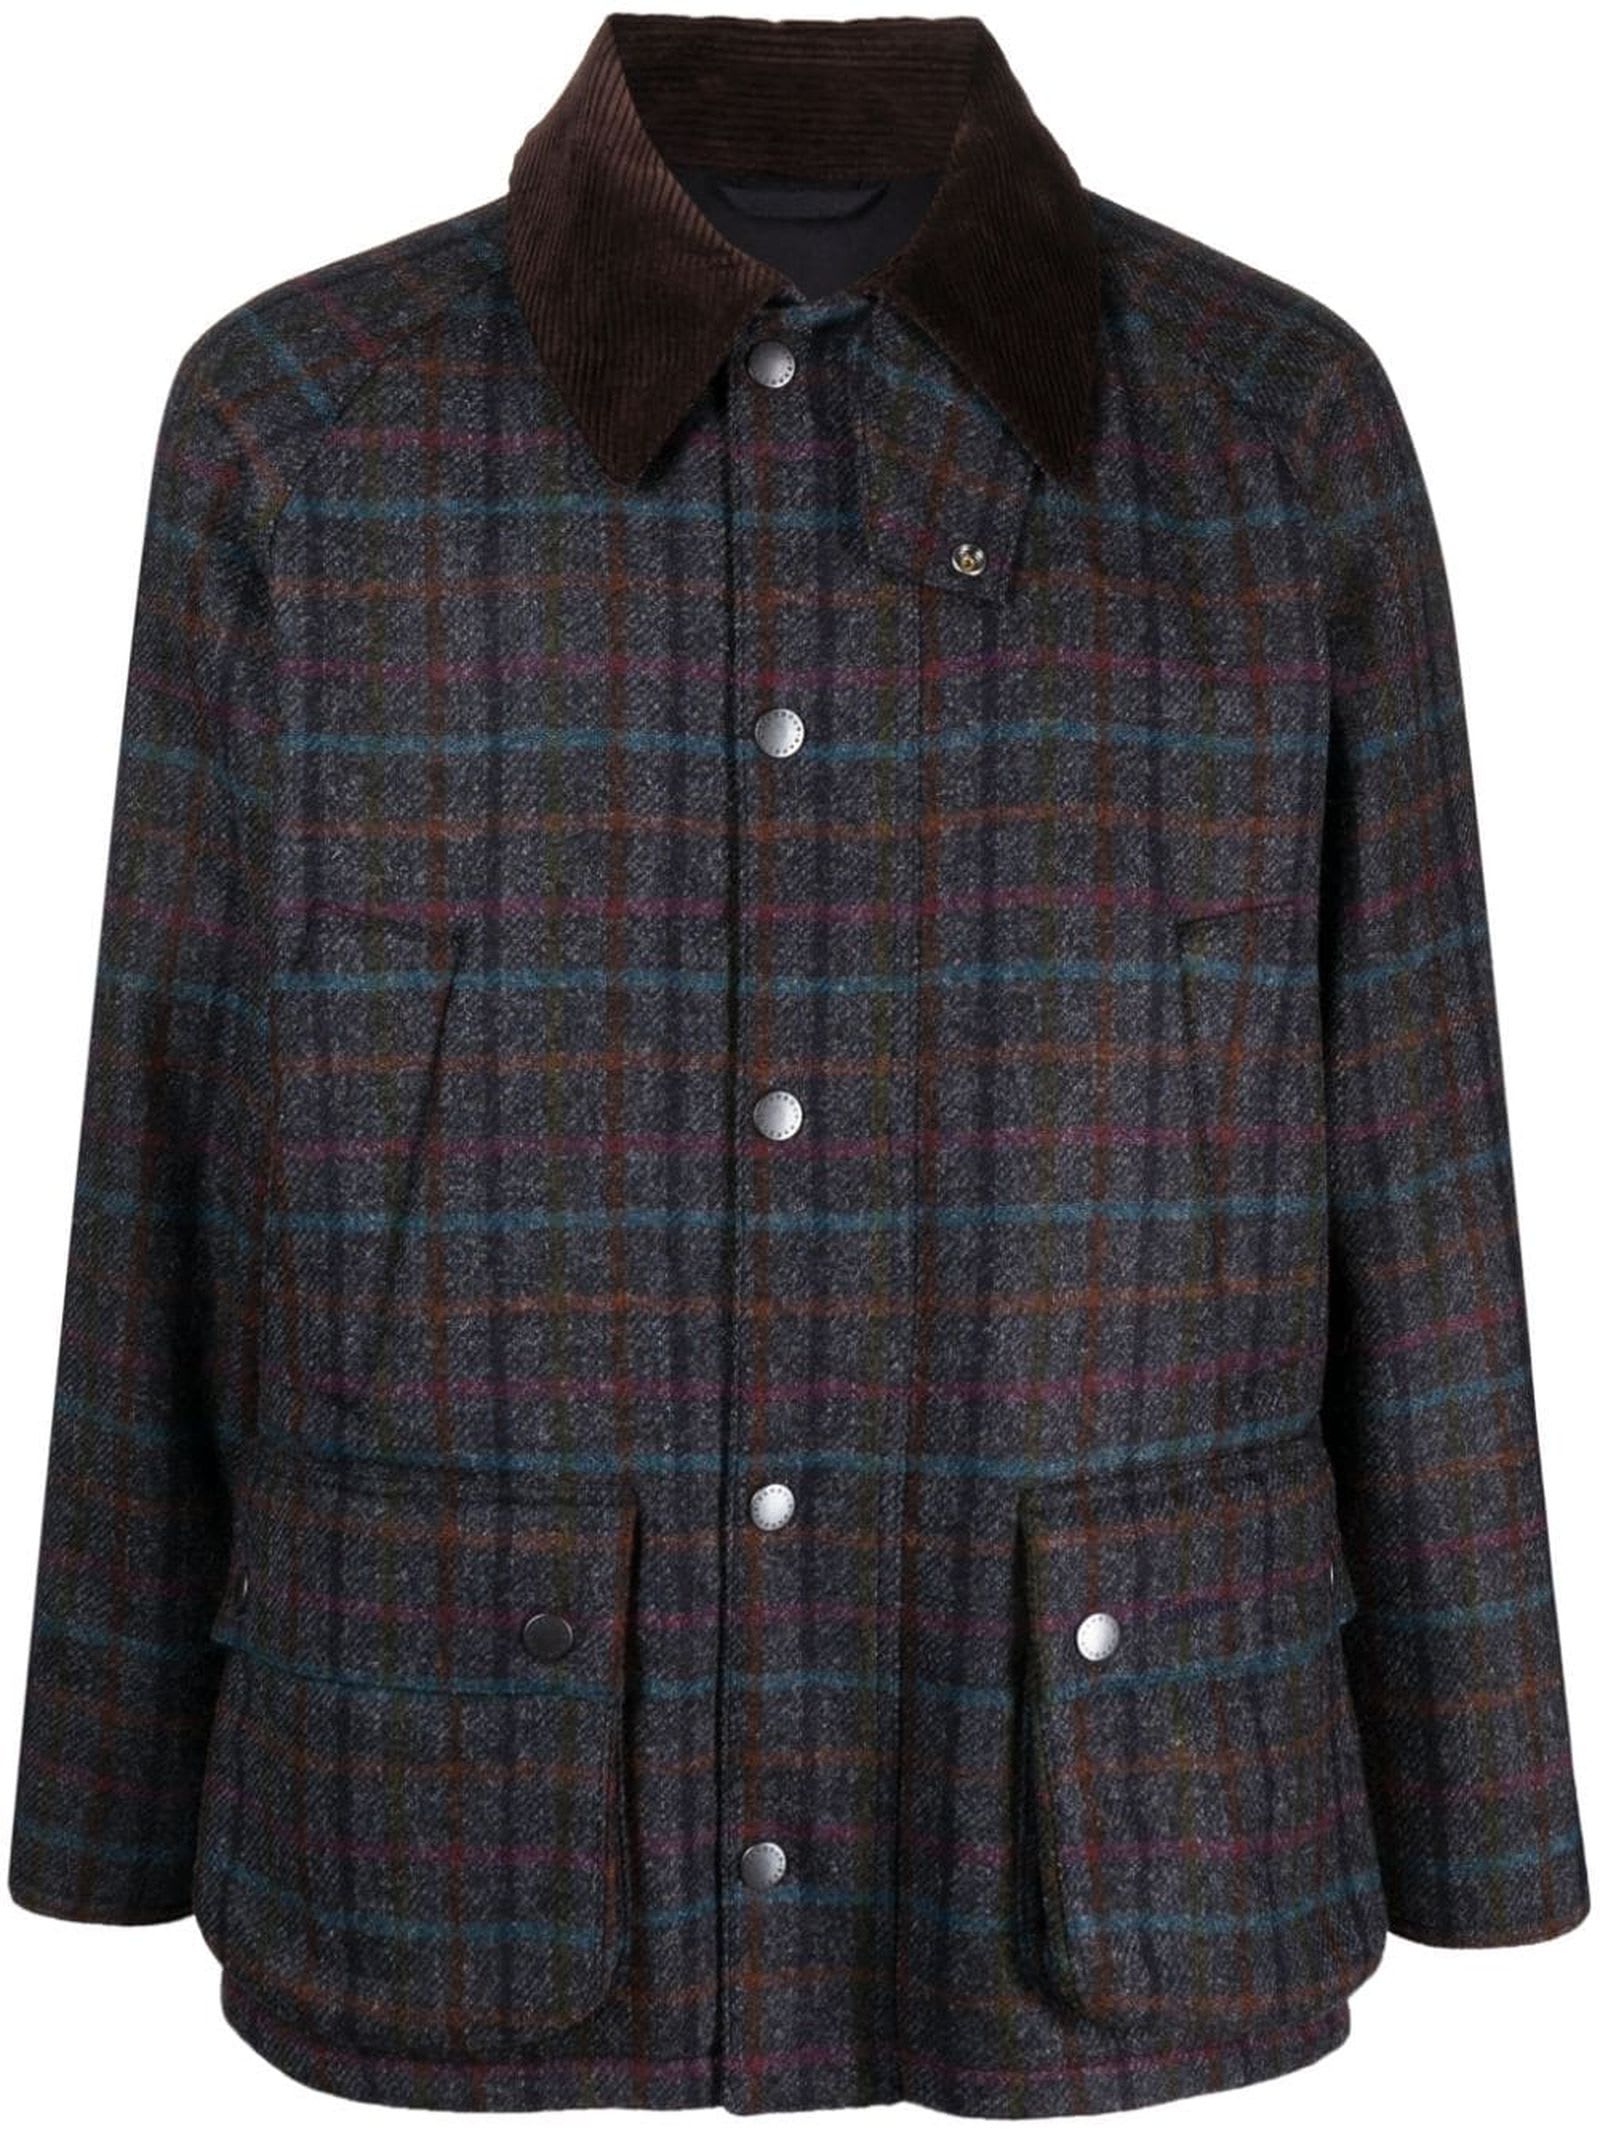 Barbour Multicolor Wool Checked Jacket